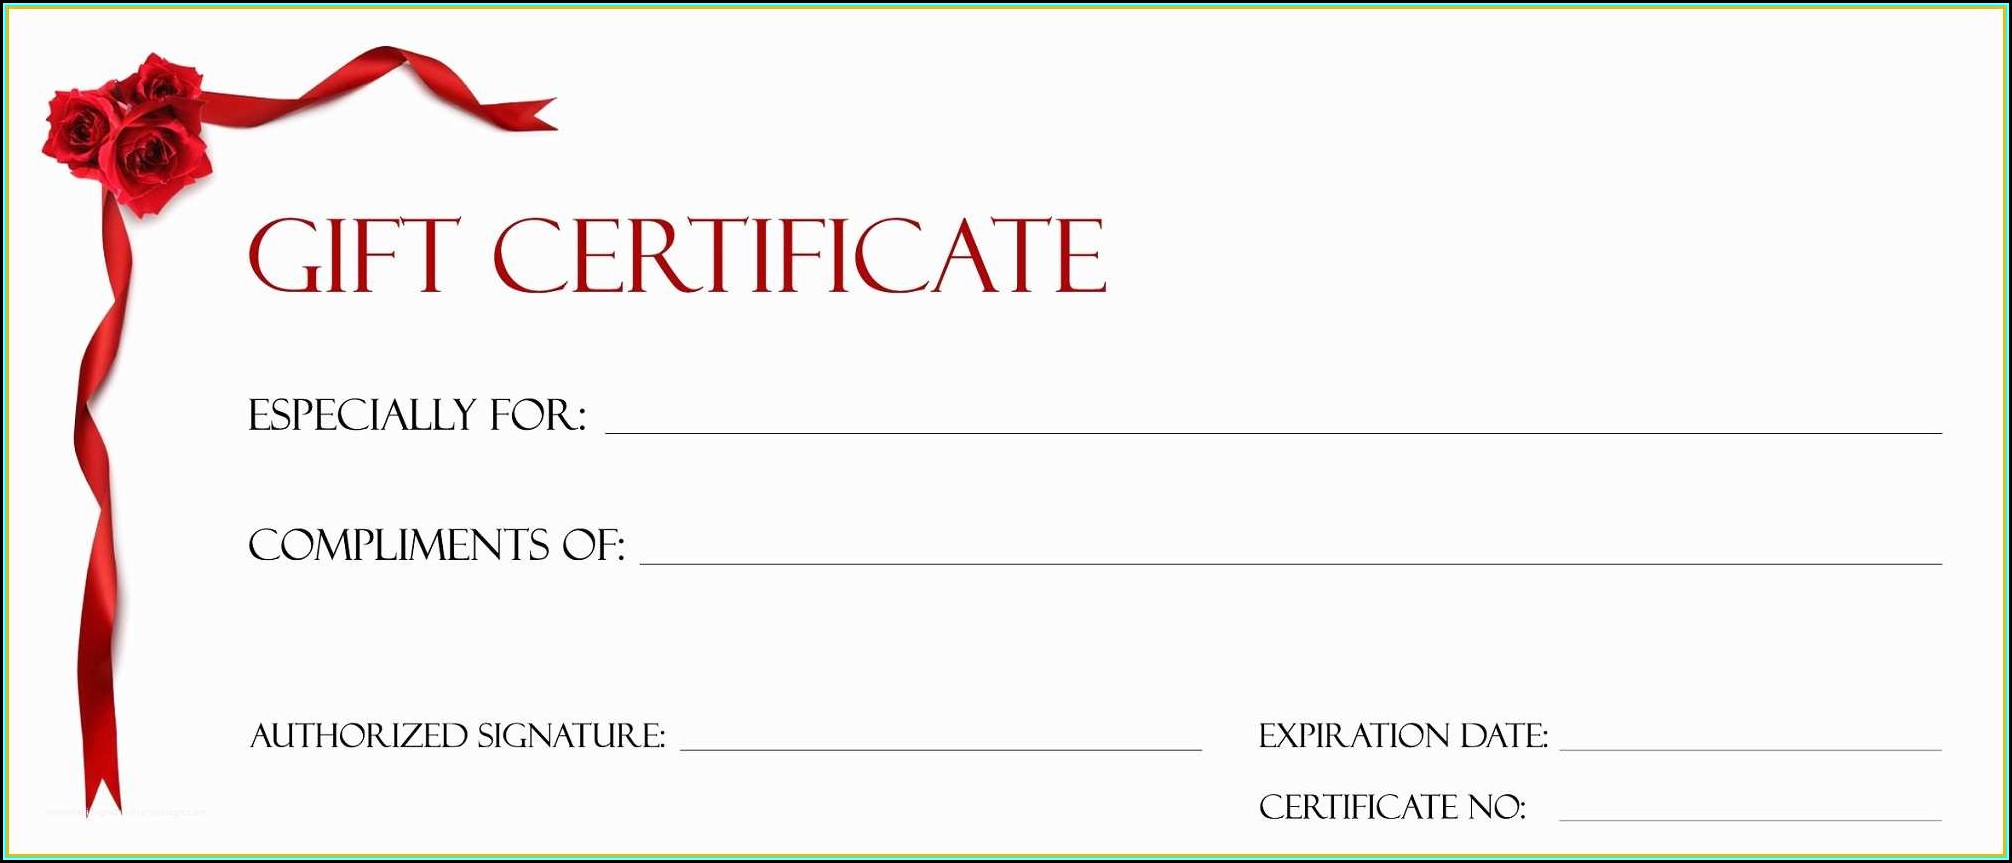 Blank Gift Certificate Templates